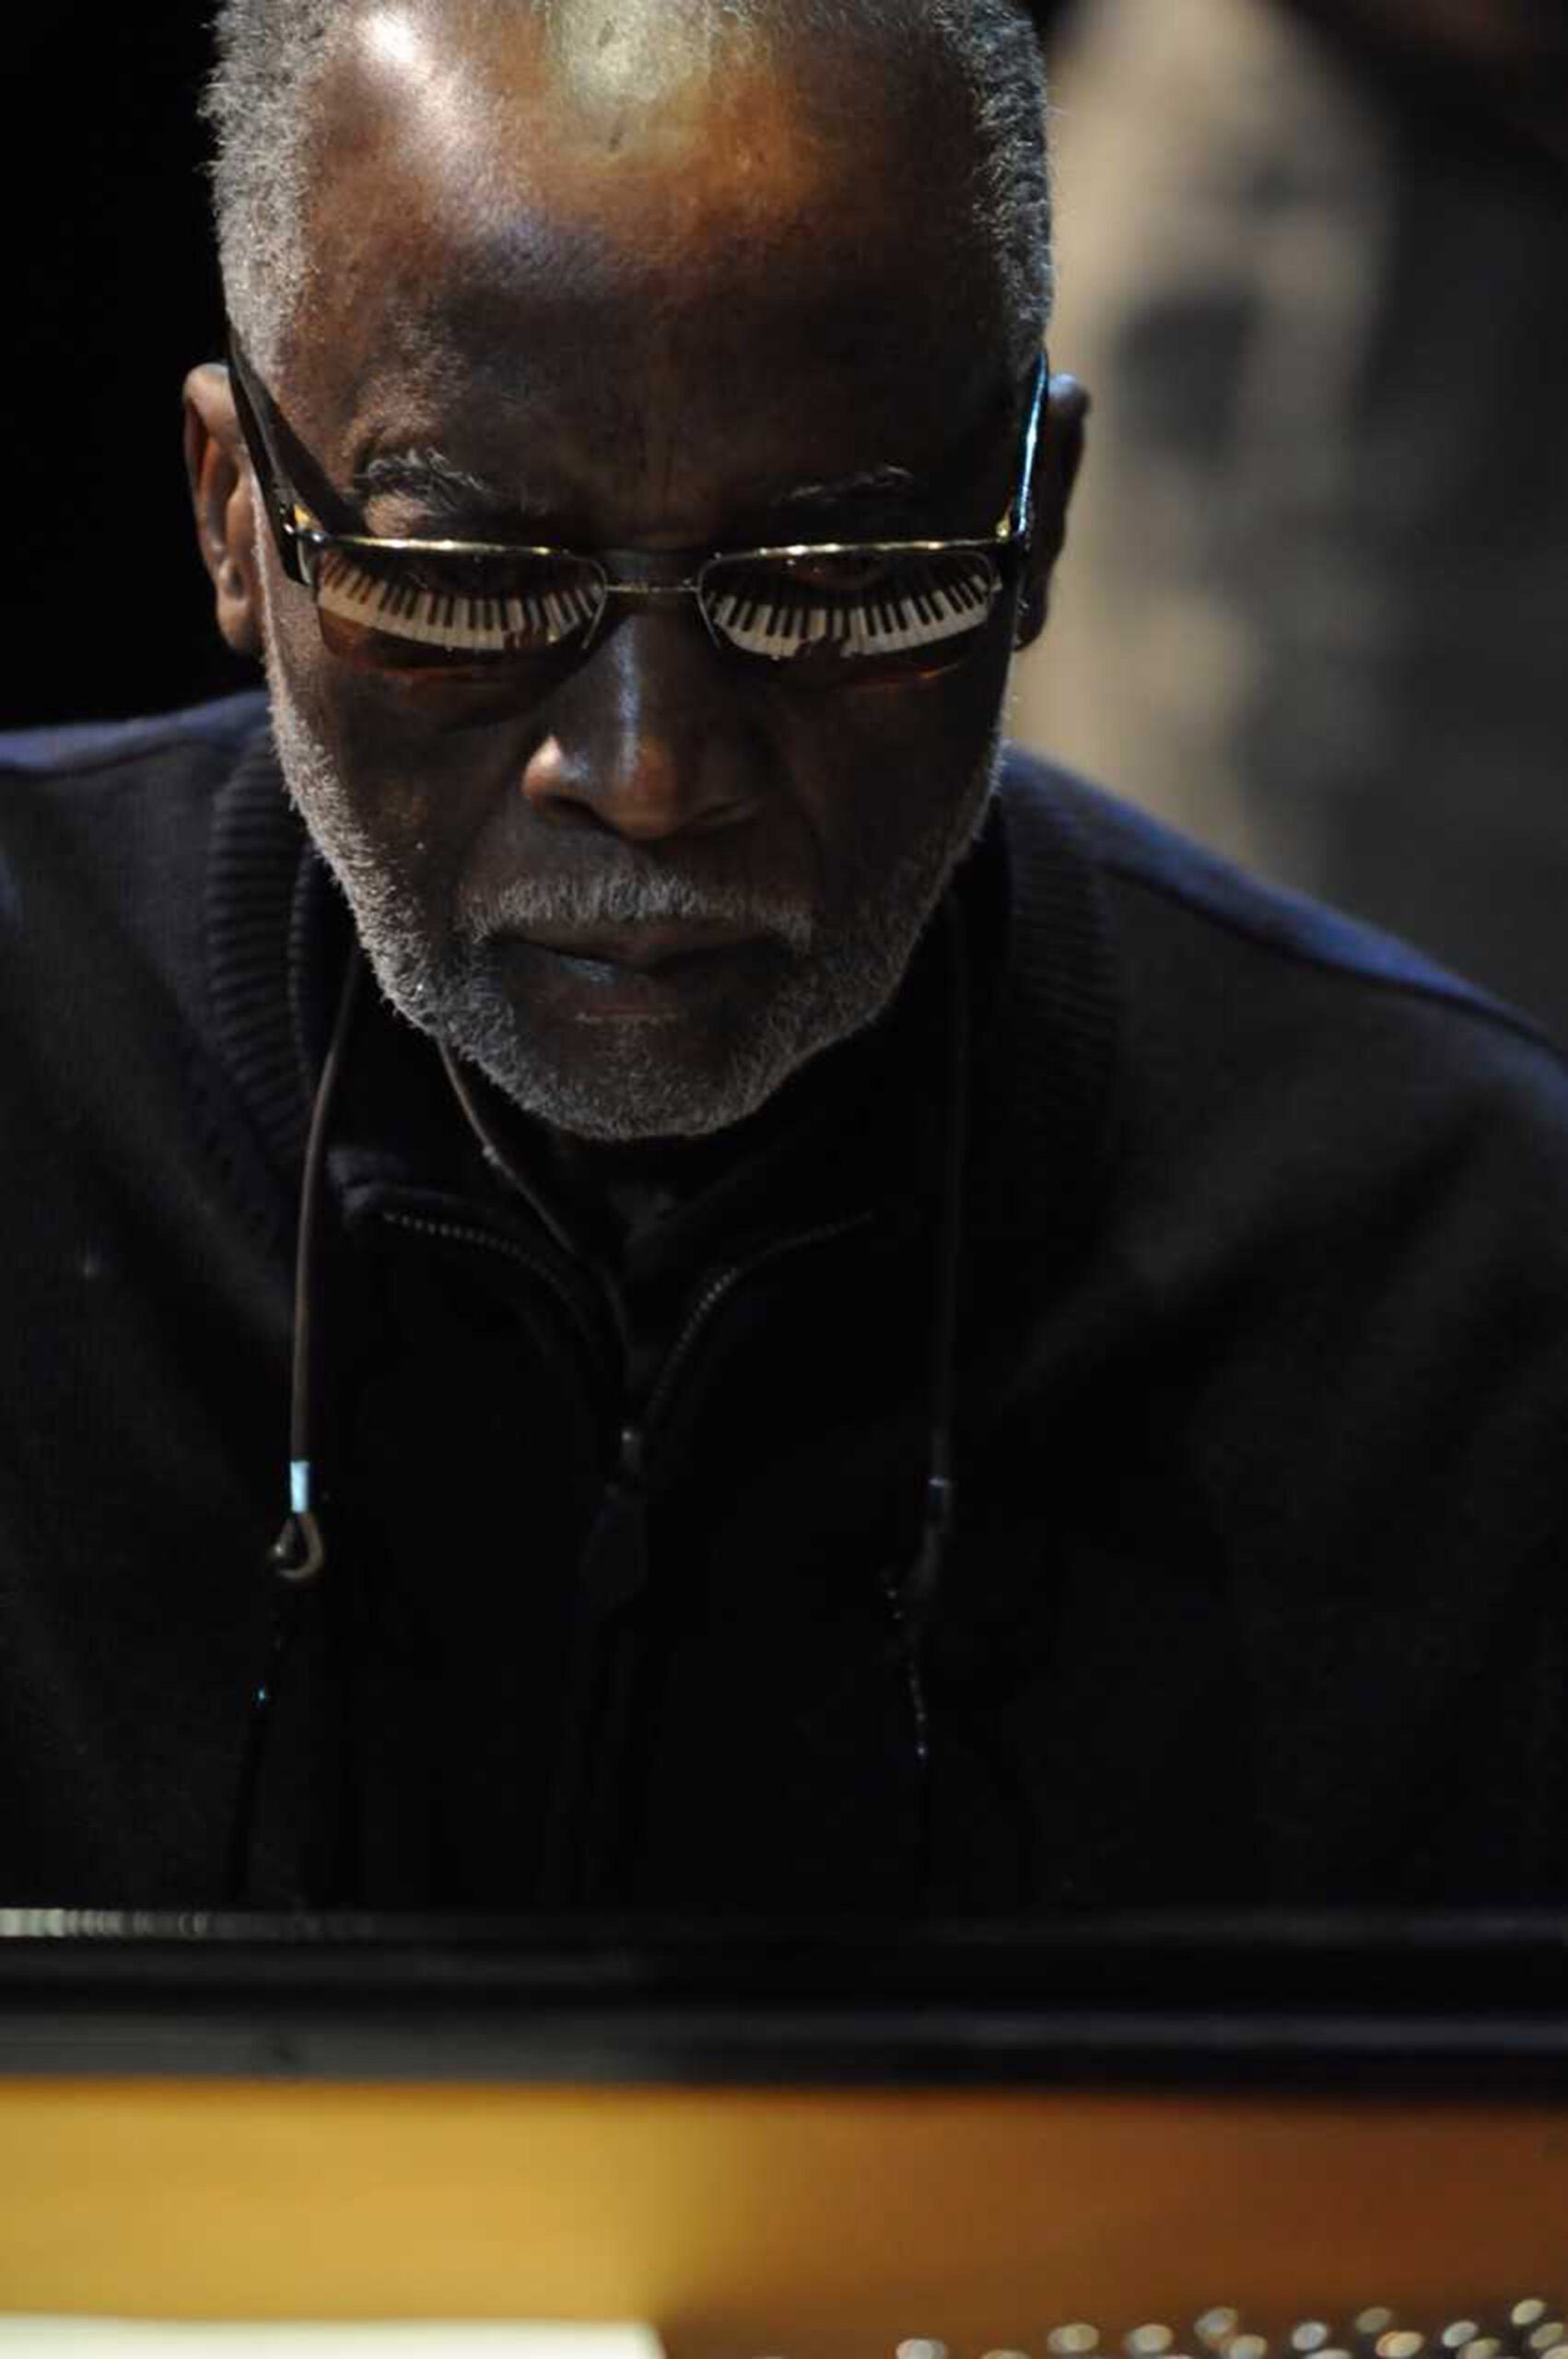 Ahmad Jamal, 2013 with piano keys reflected in glasses